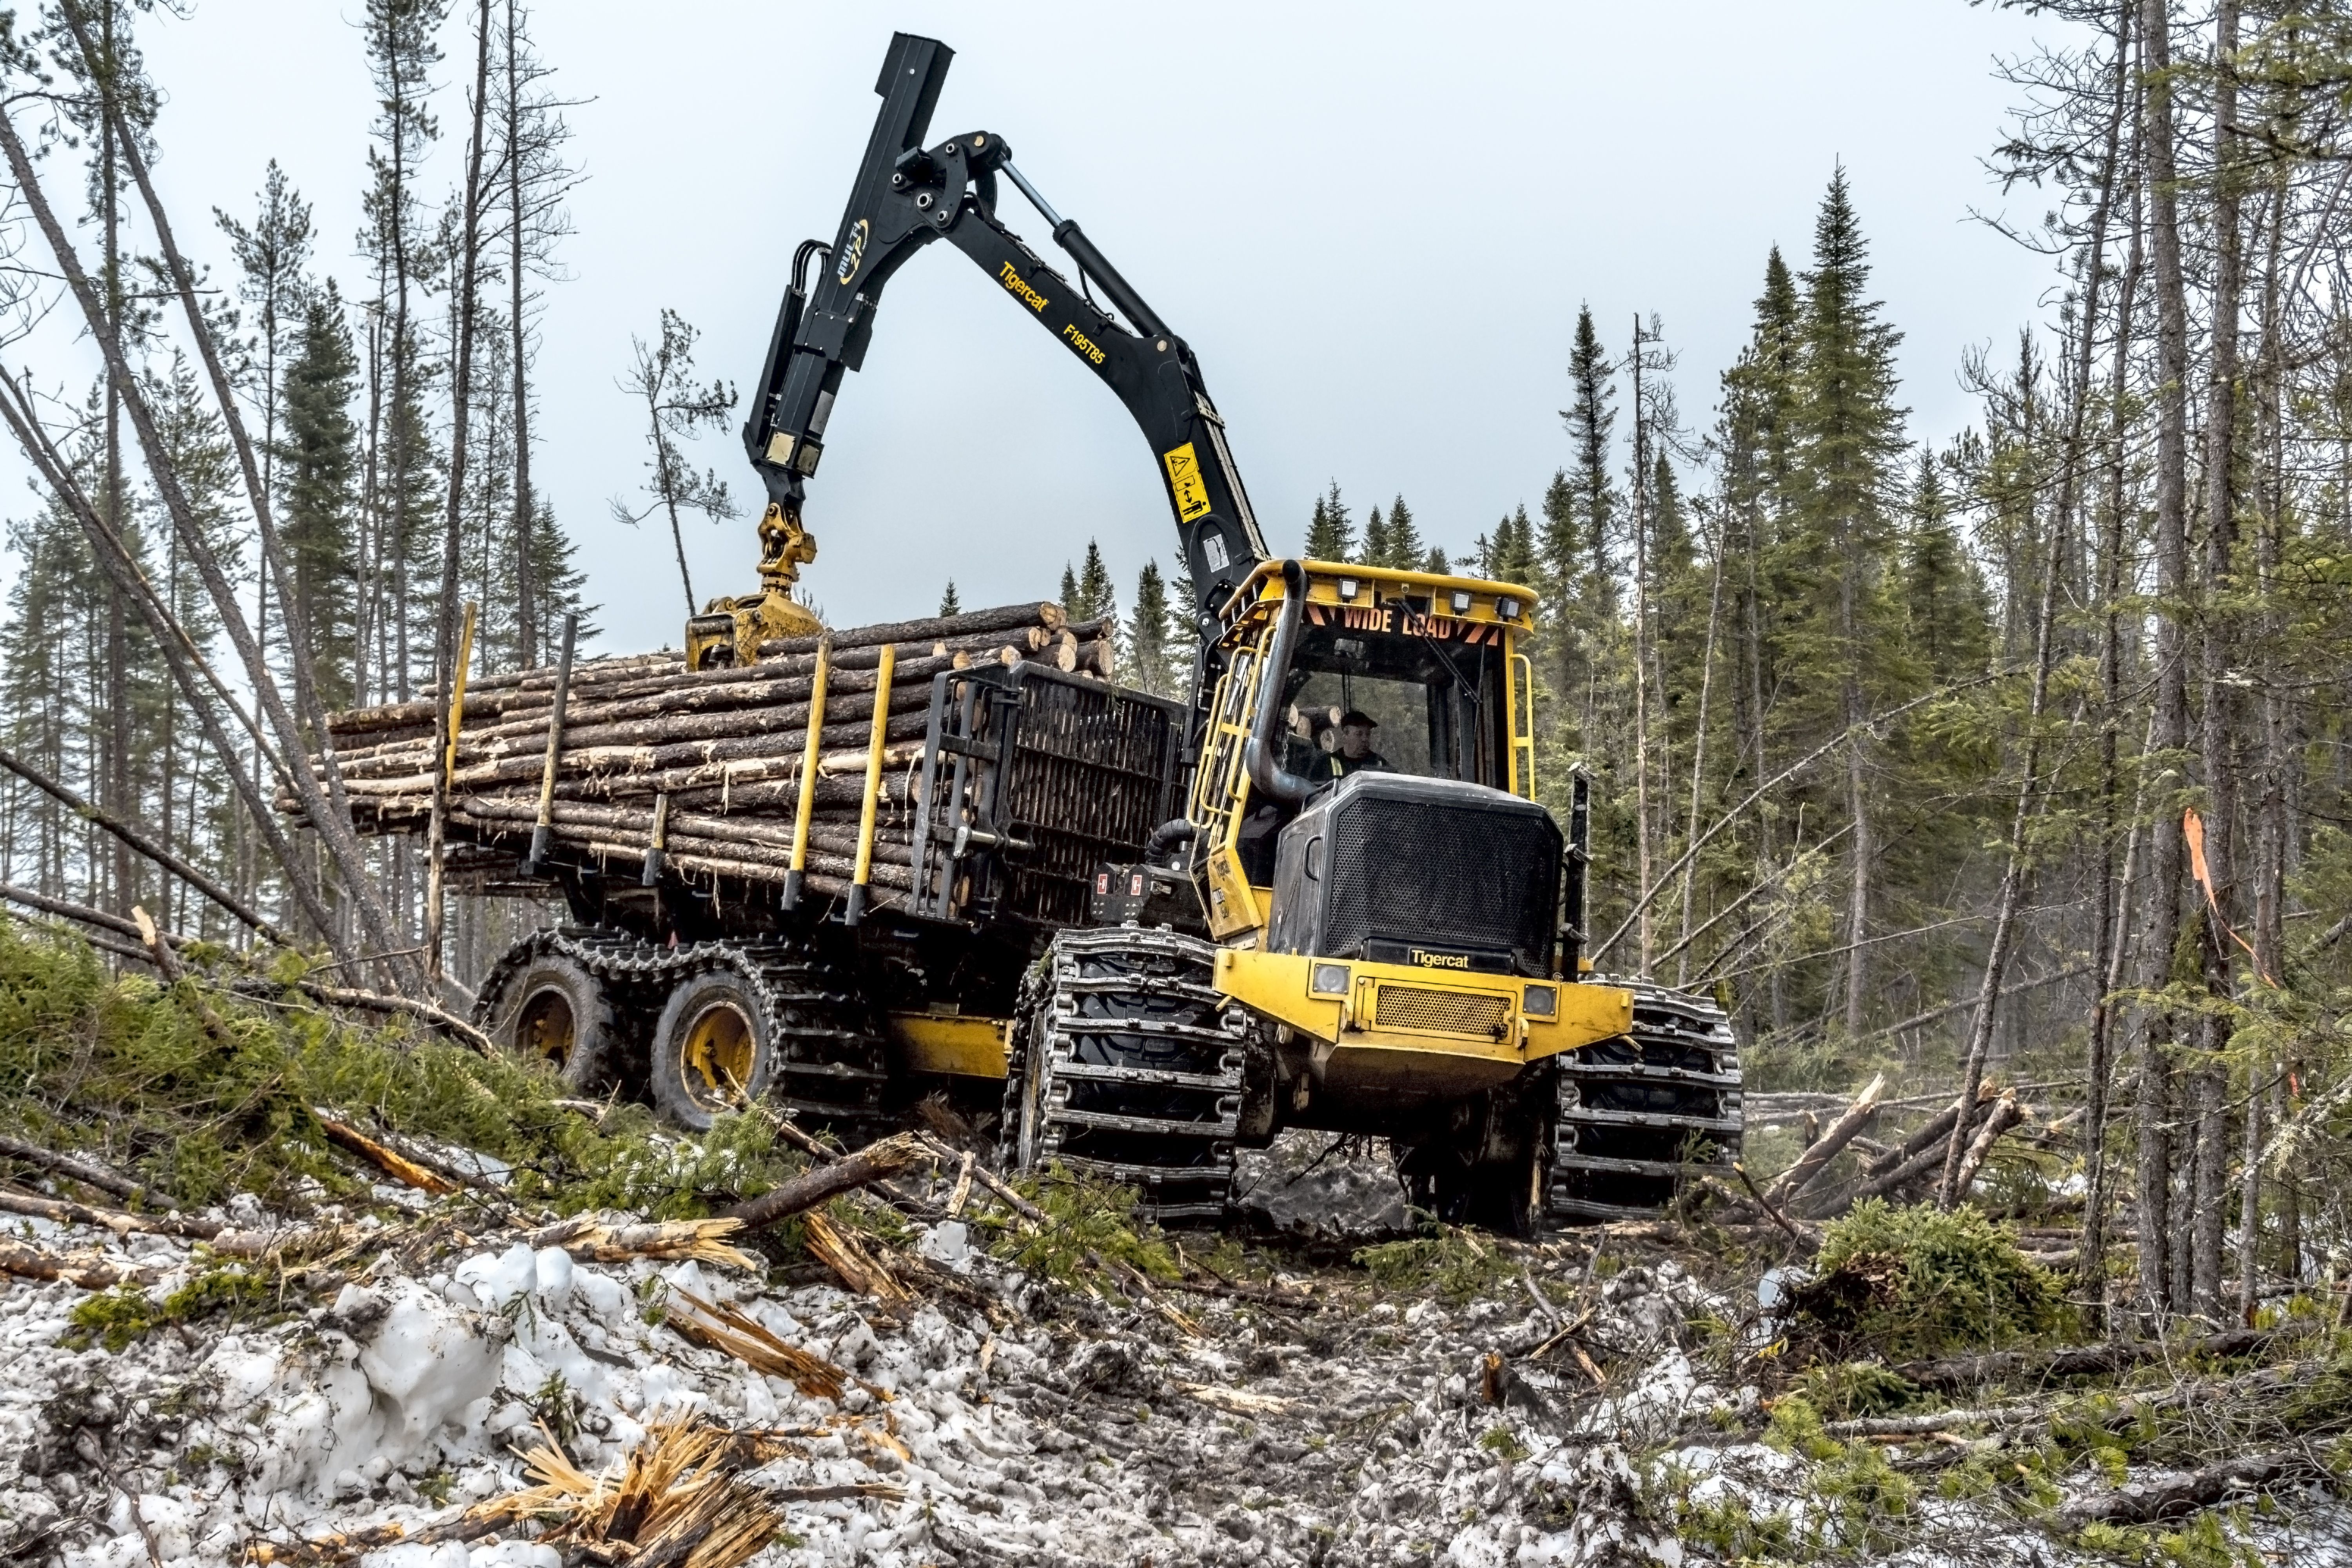 Download Tigercat image of Forest Machines